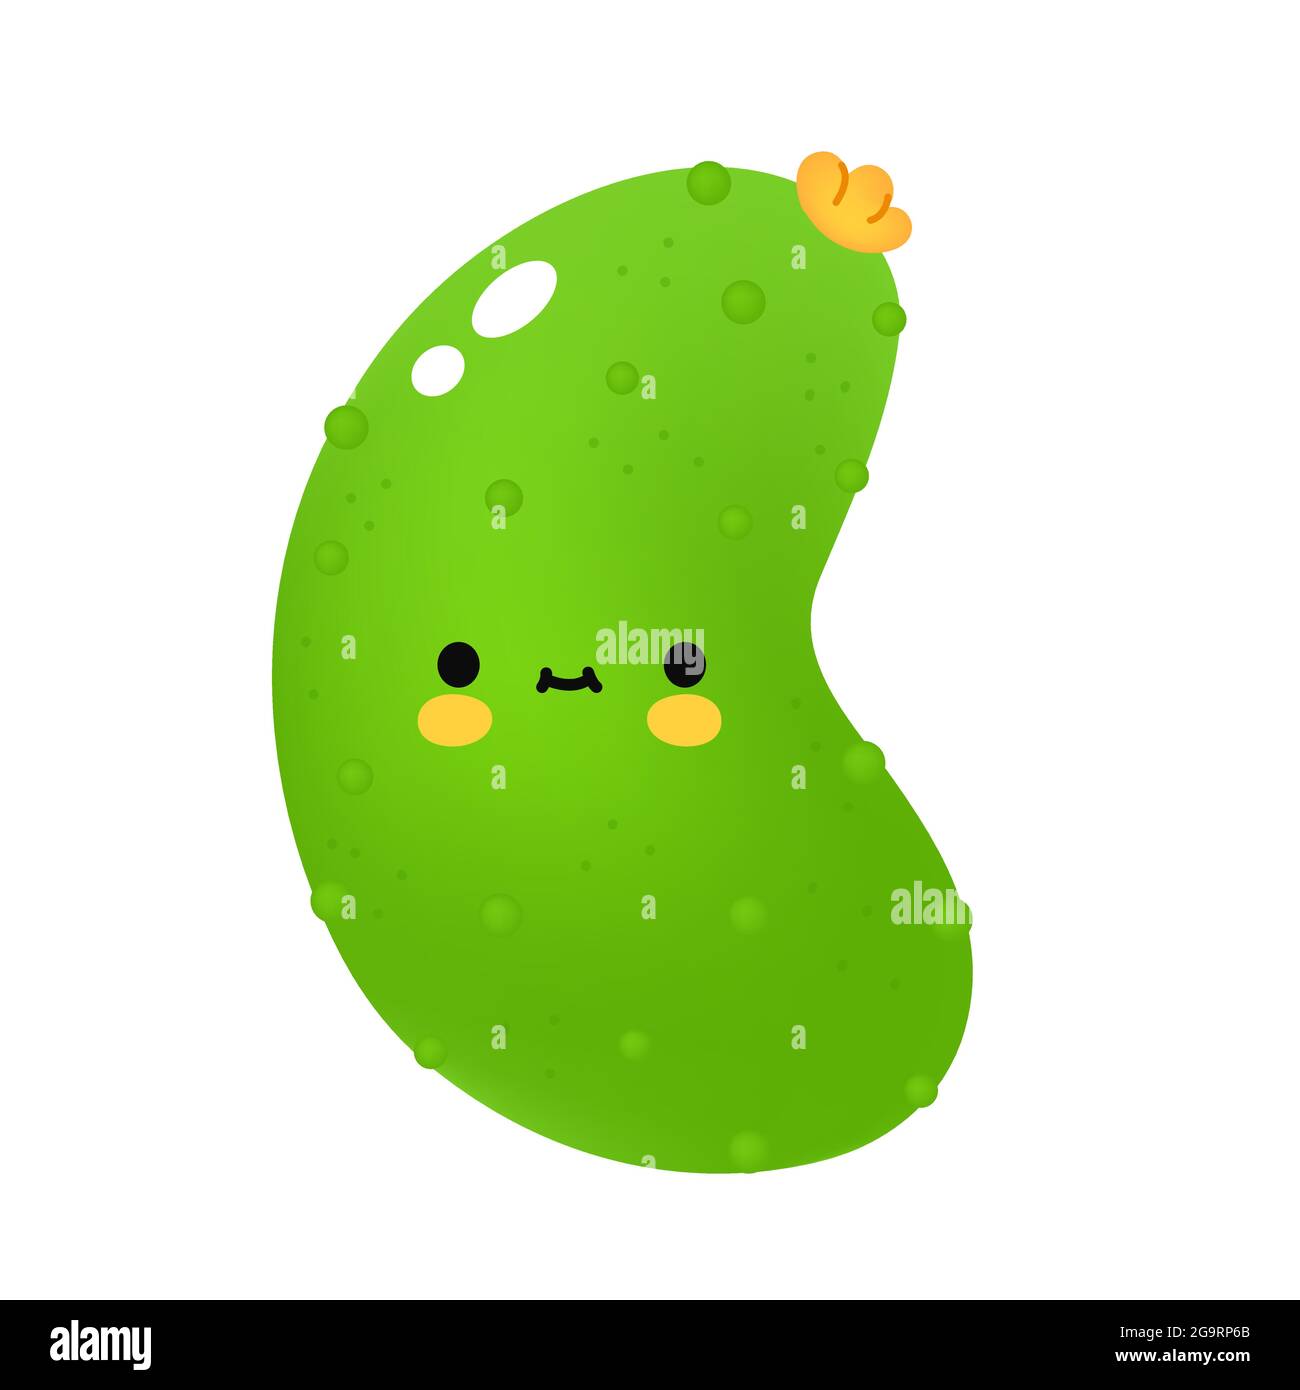 Cute funny cucumber vegetable with face. Vector cartoon kawaii doodle character illustration icon. Cucumber green vegetable cartoon character mascot concept. Isolated on white background Stock Vector